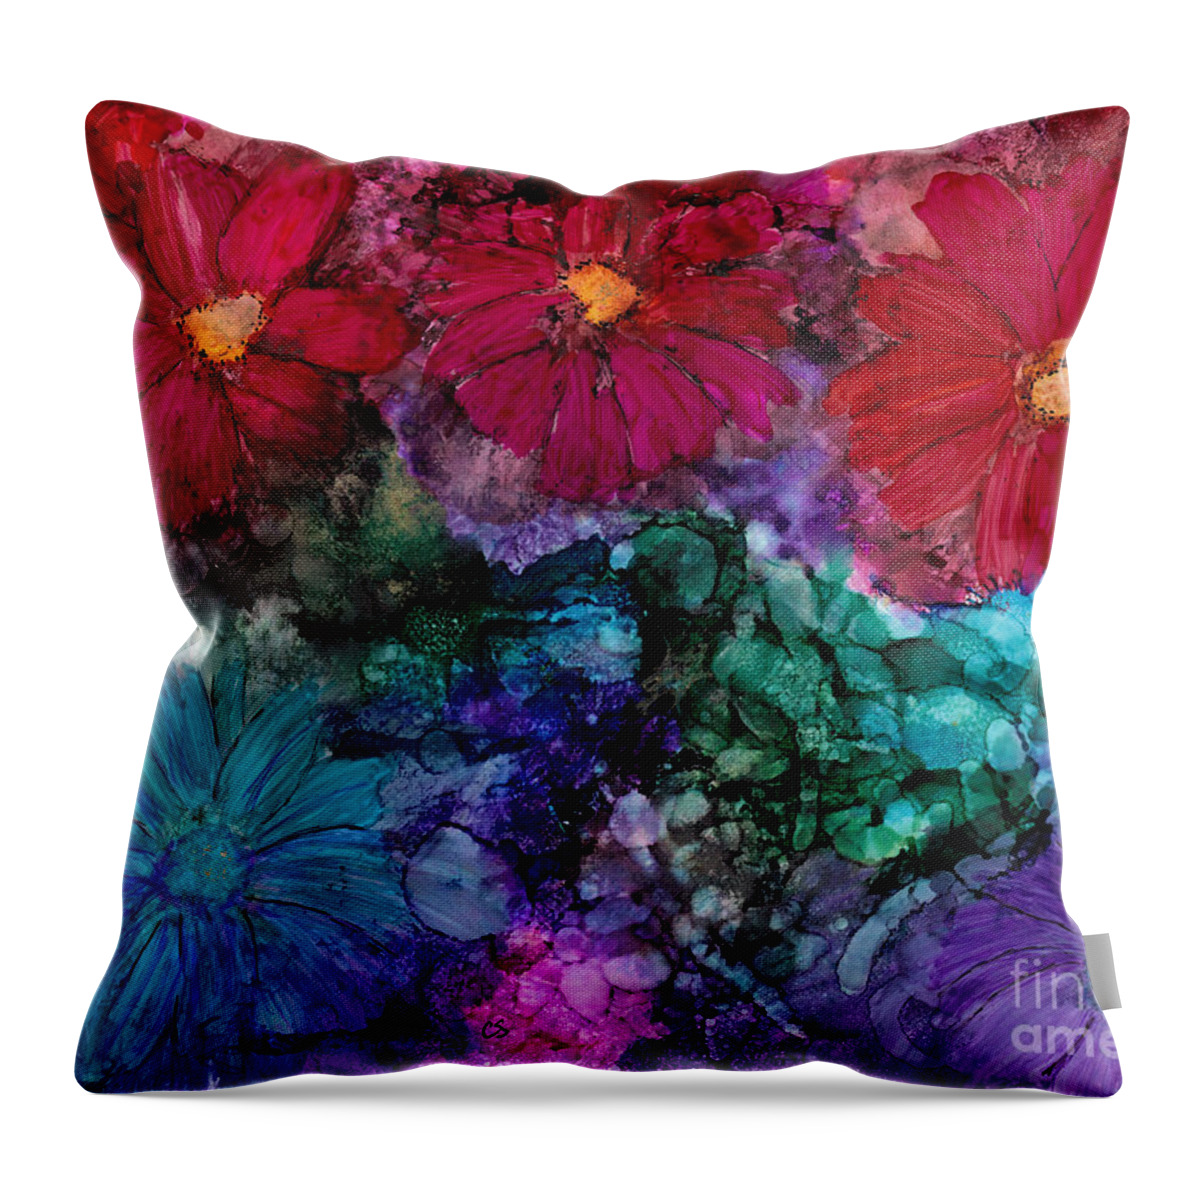 Flowers Throw Pillow featuring the painting Drunken Flowers by Conni Schaftenaar